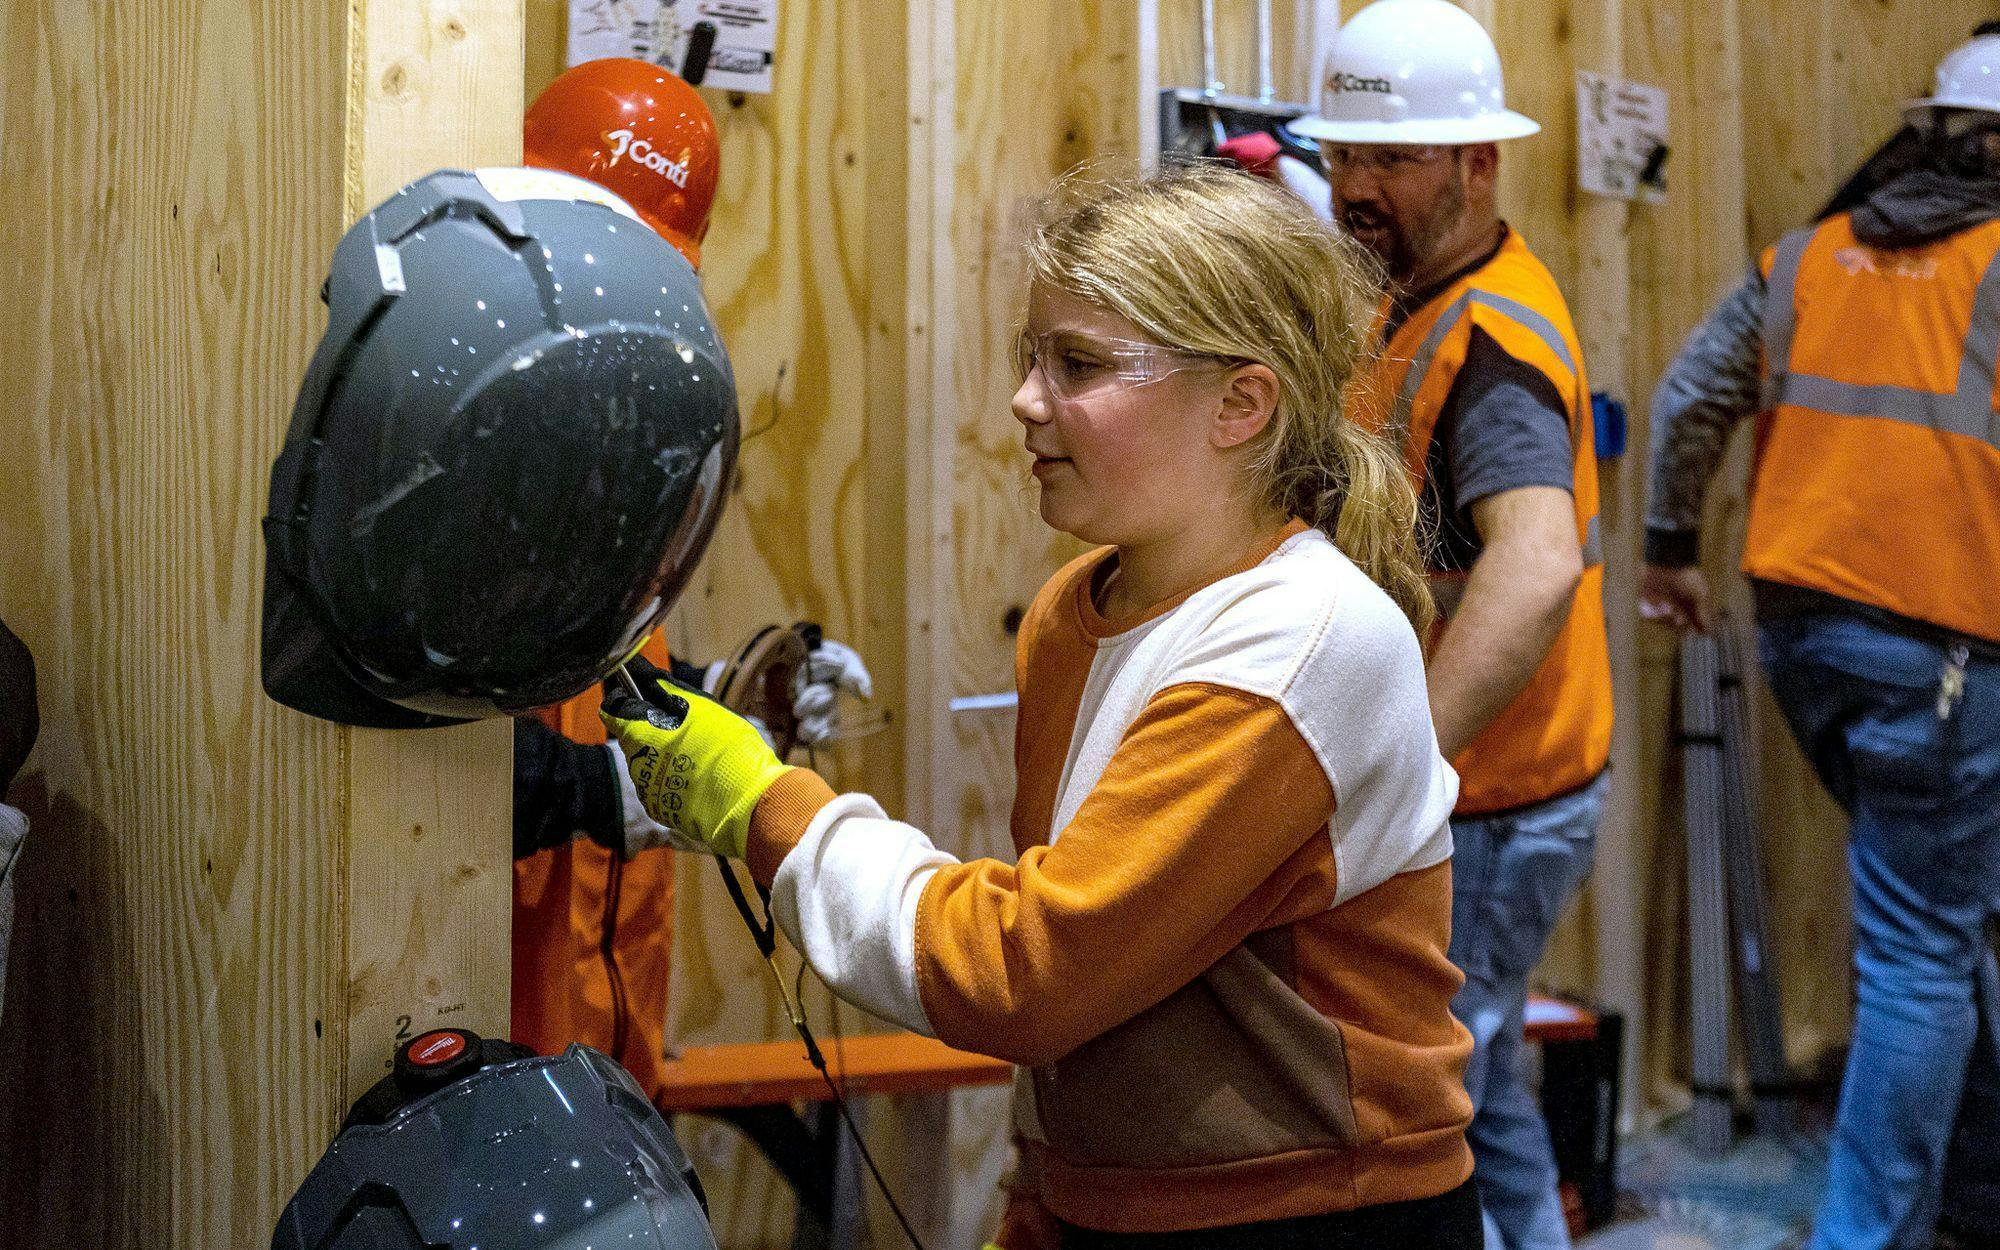 Girls participate in construction activities.